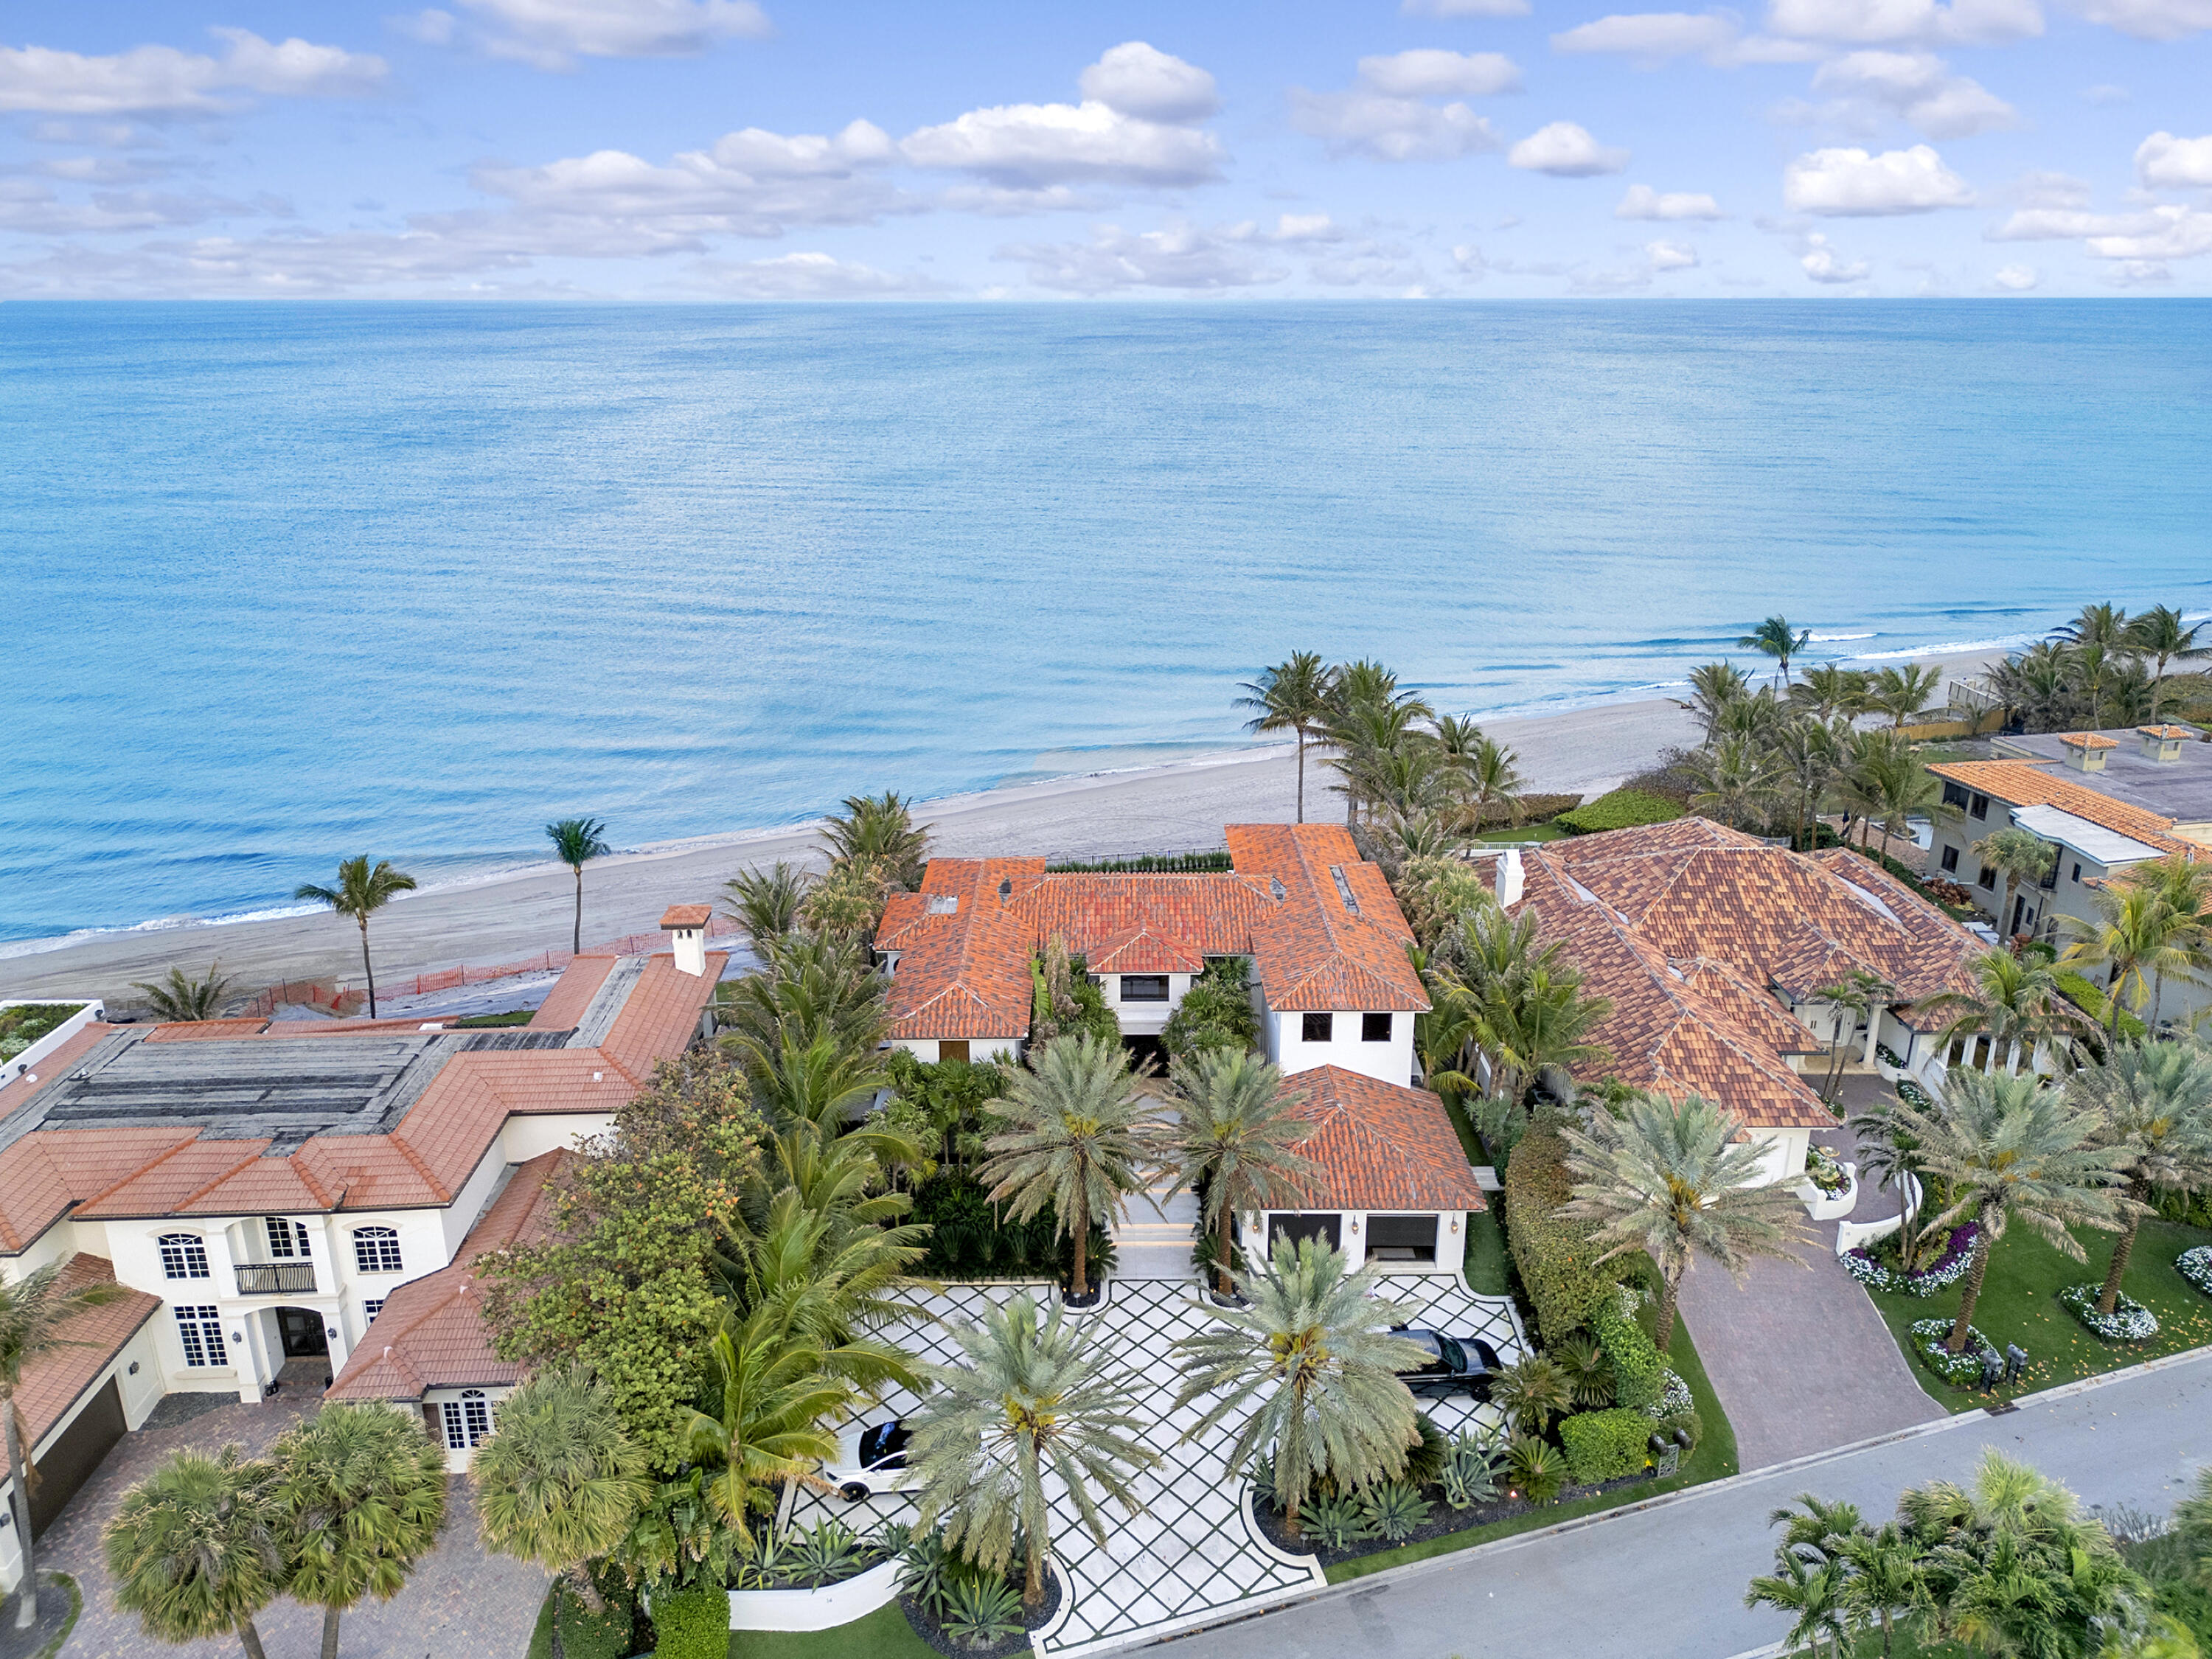 14 Ocean Drive, Jupiter Inlet Colony, Palm Beach County, Florida - 5 Bedrooms  
7.5 Bathrooms - 